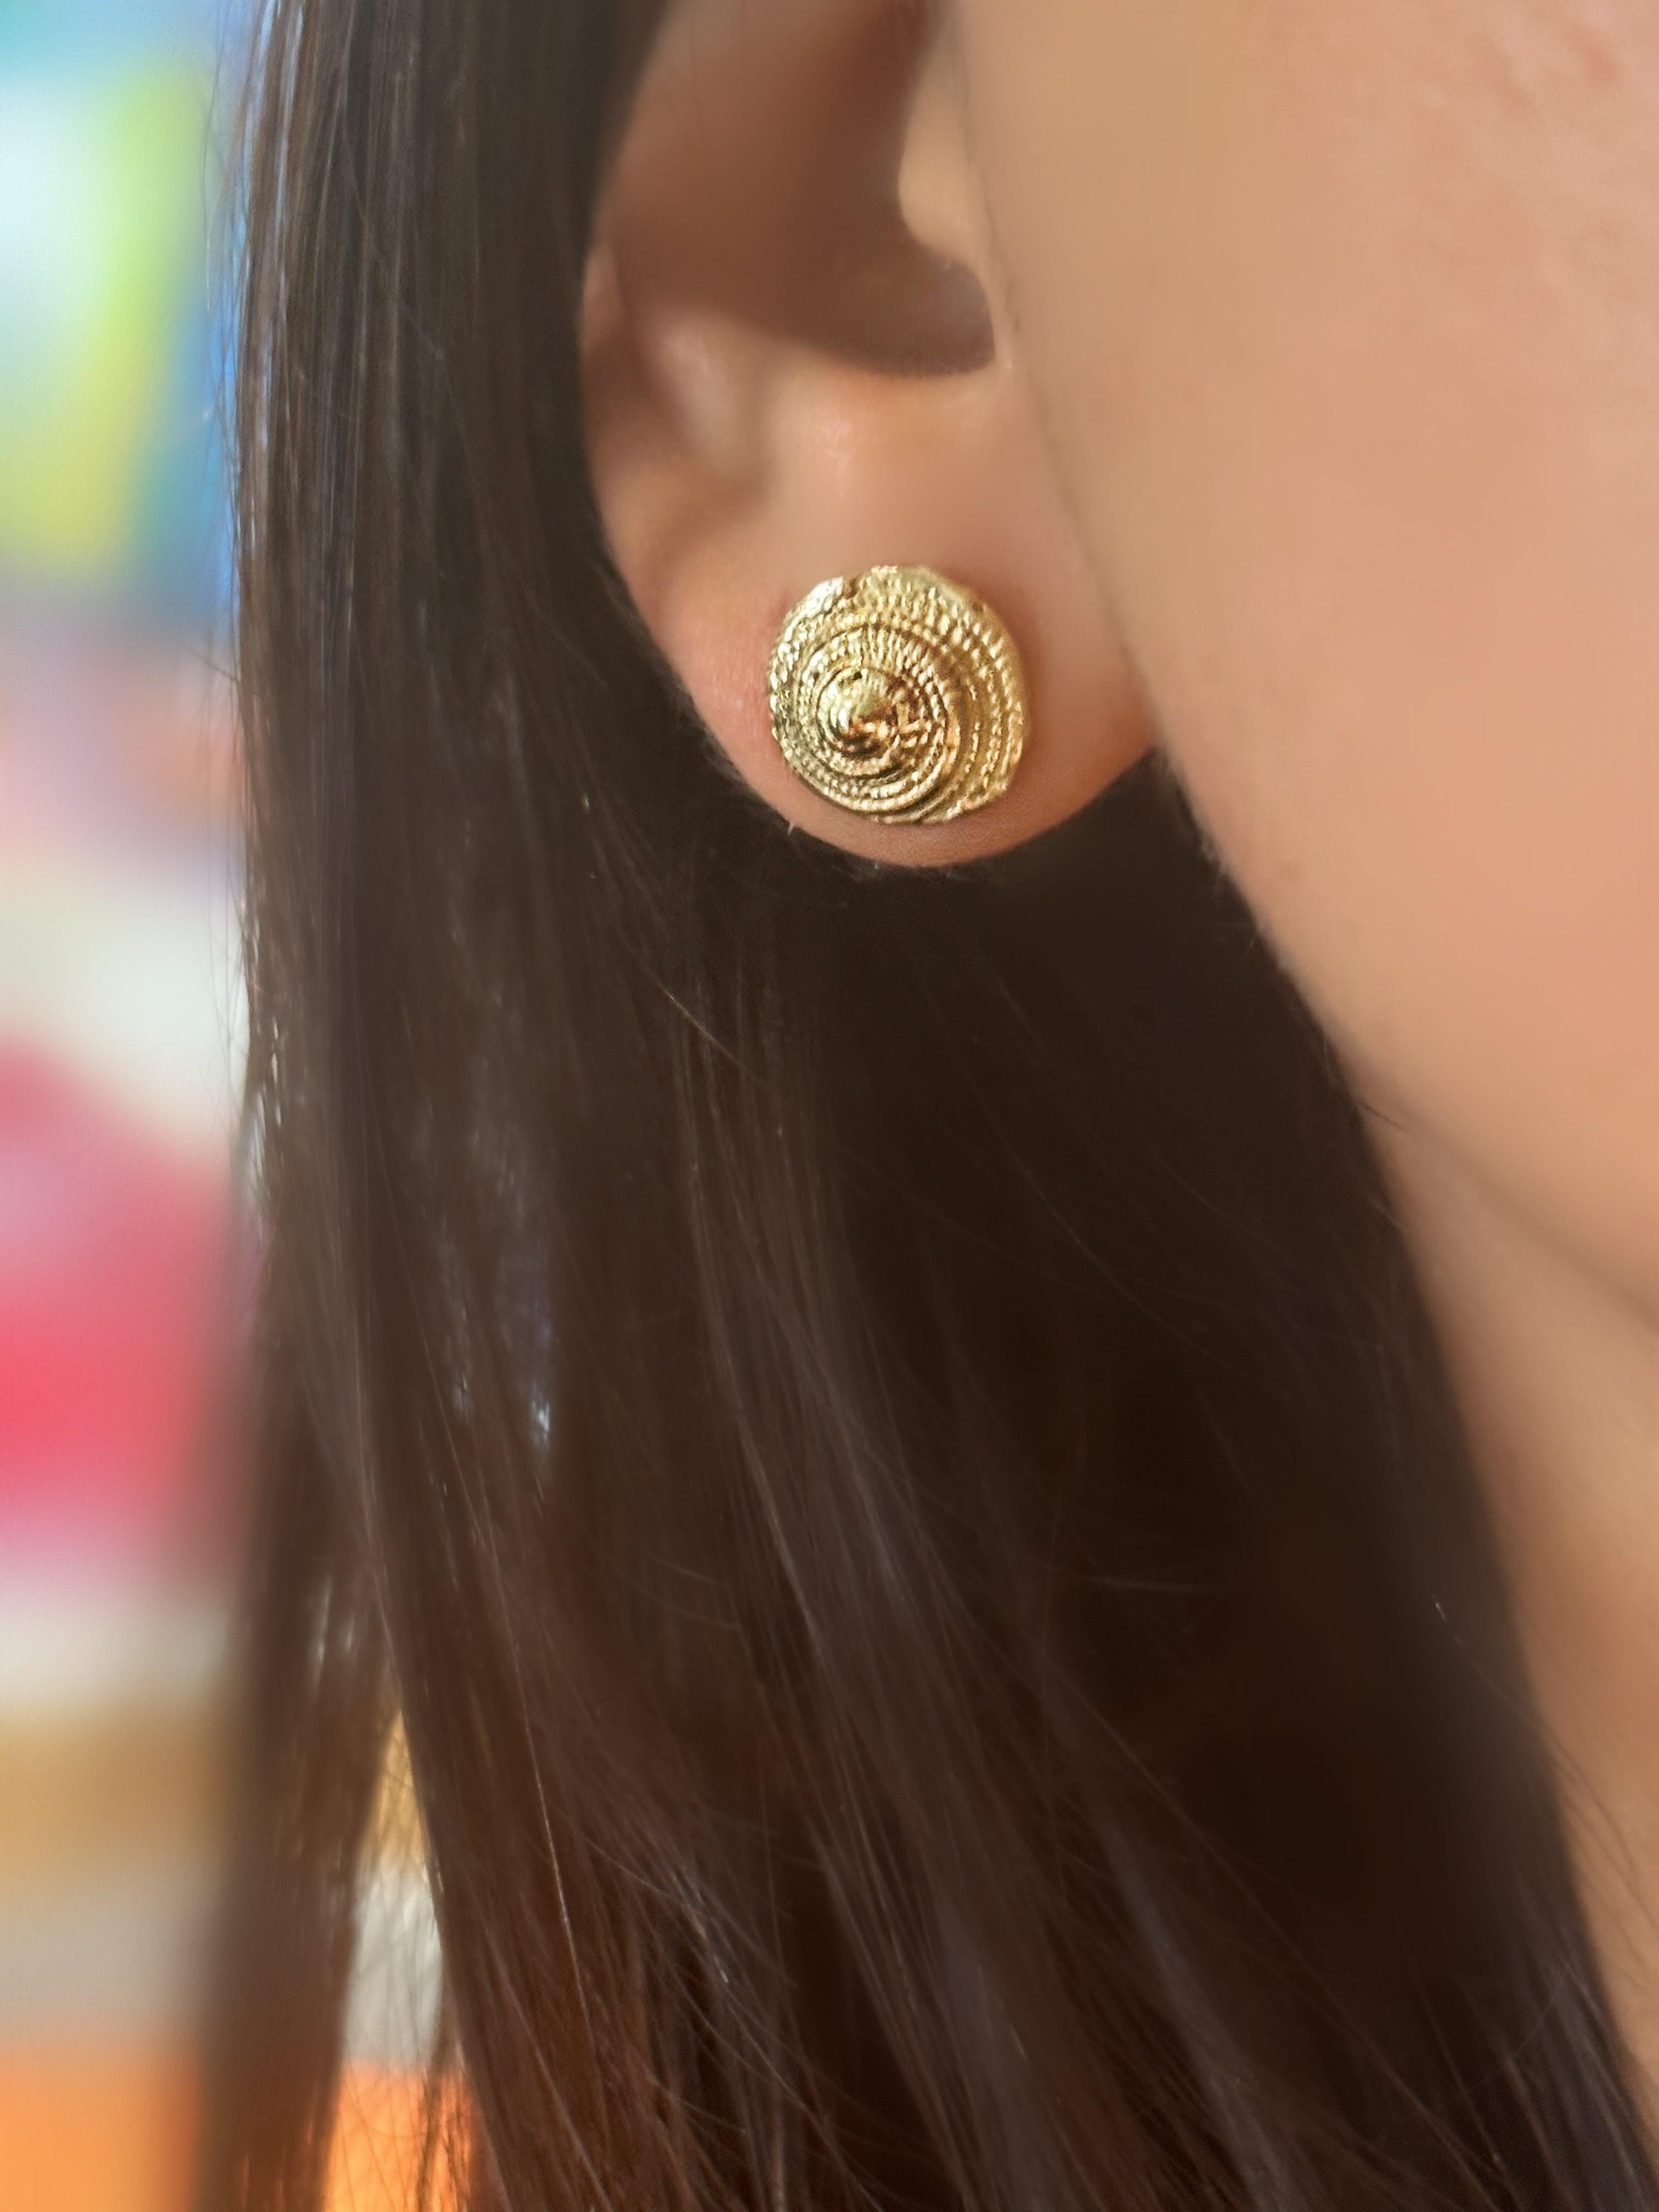 Hellenistic 18K Yellow Gold Sea Spiral Snail Earring Stud For Sale